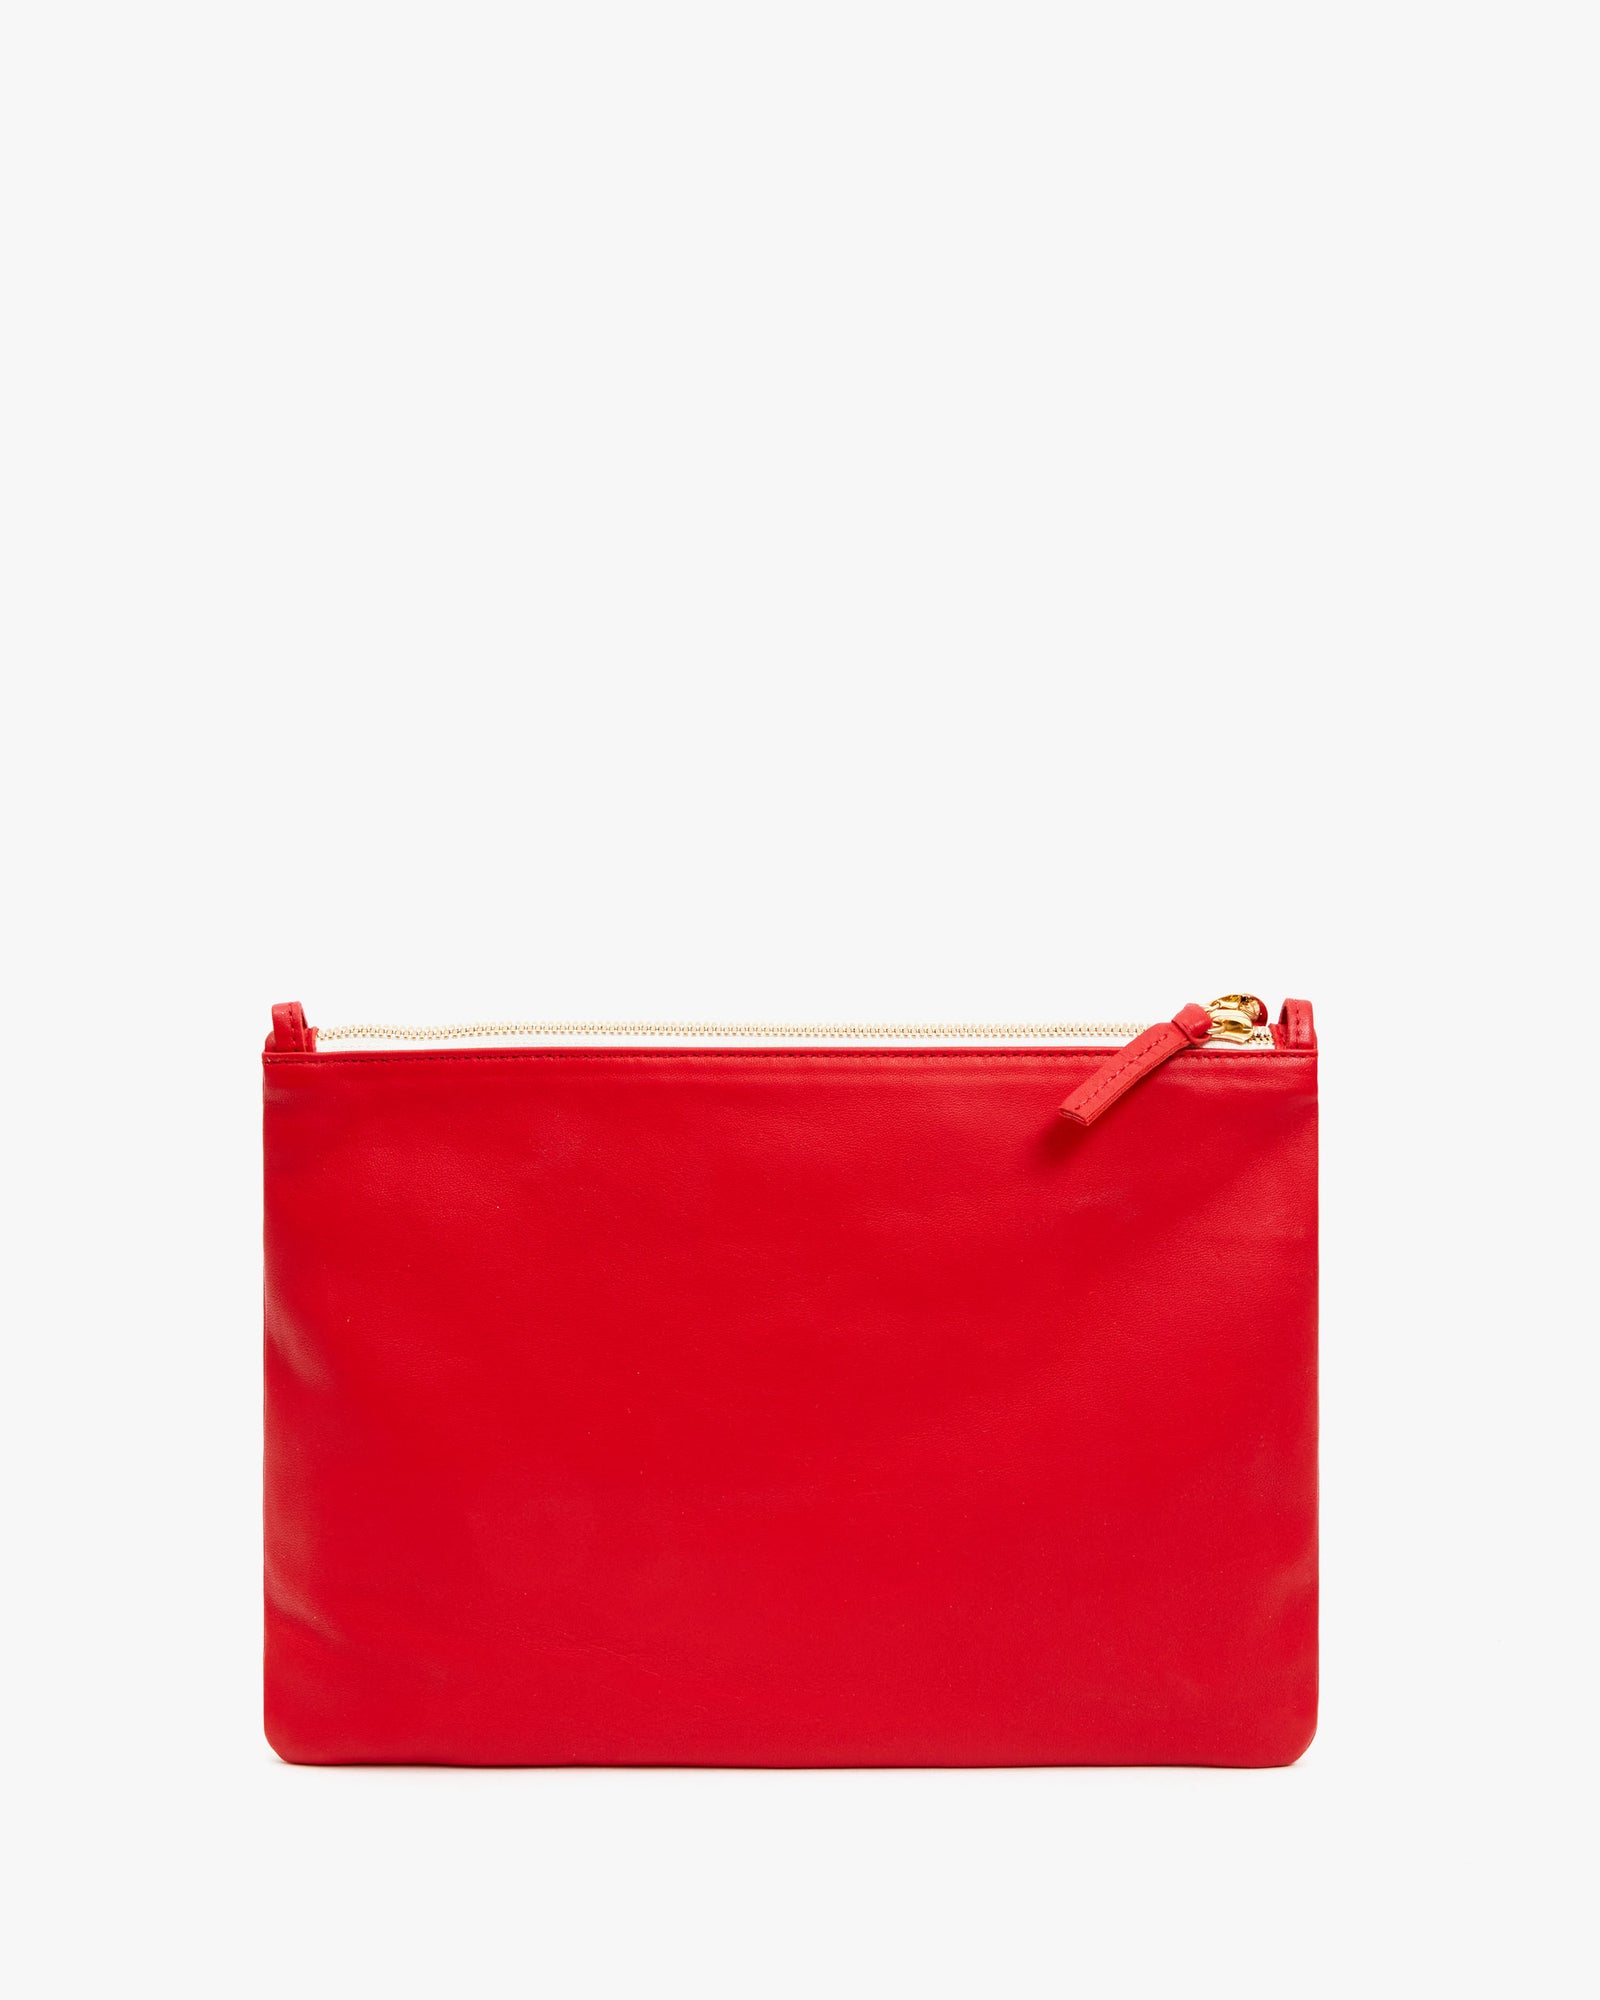 back image of the Cherry Red Oui Flat Clutch w/ Tabs